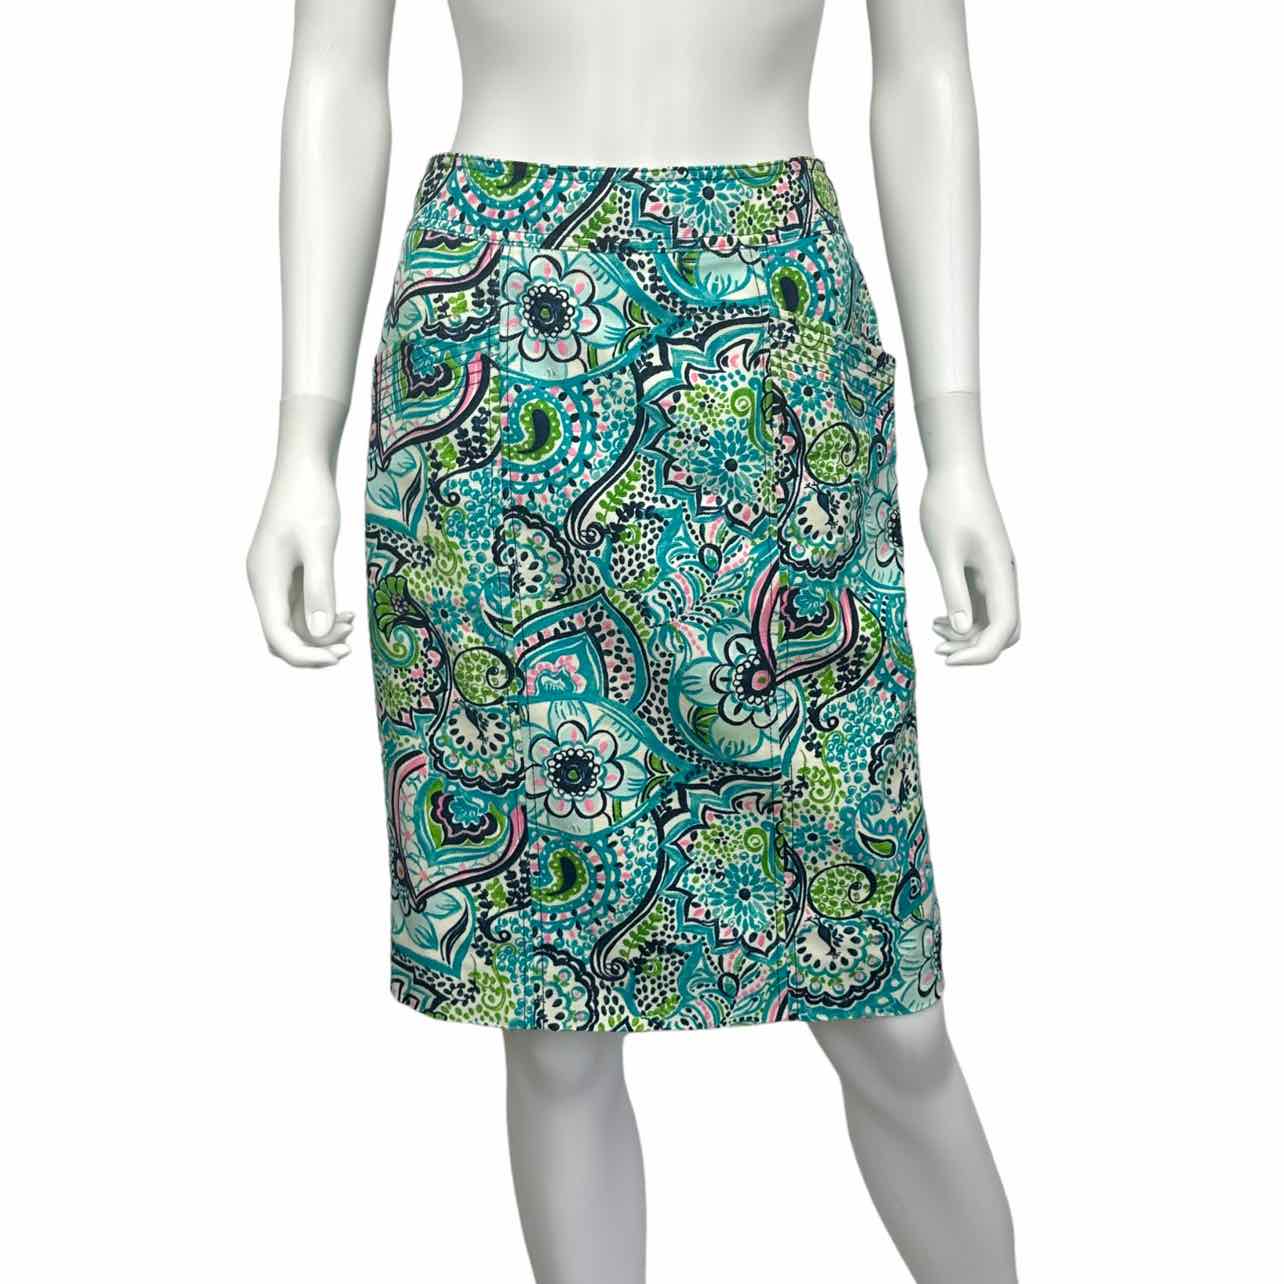 Lilly Pulitzer Colorful Print Pencil Skirt Size 2